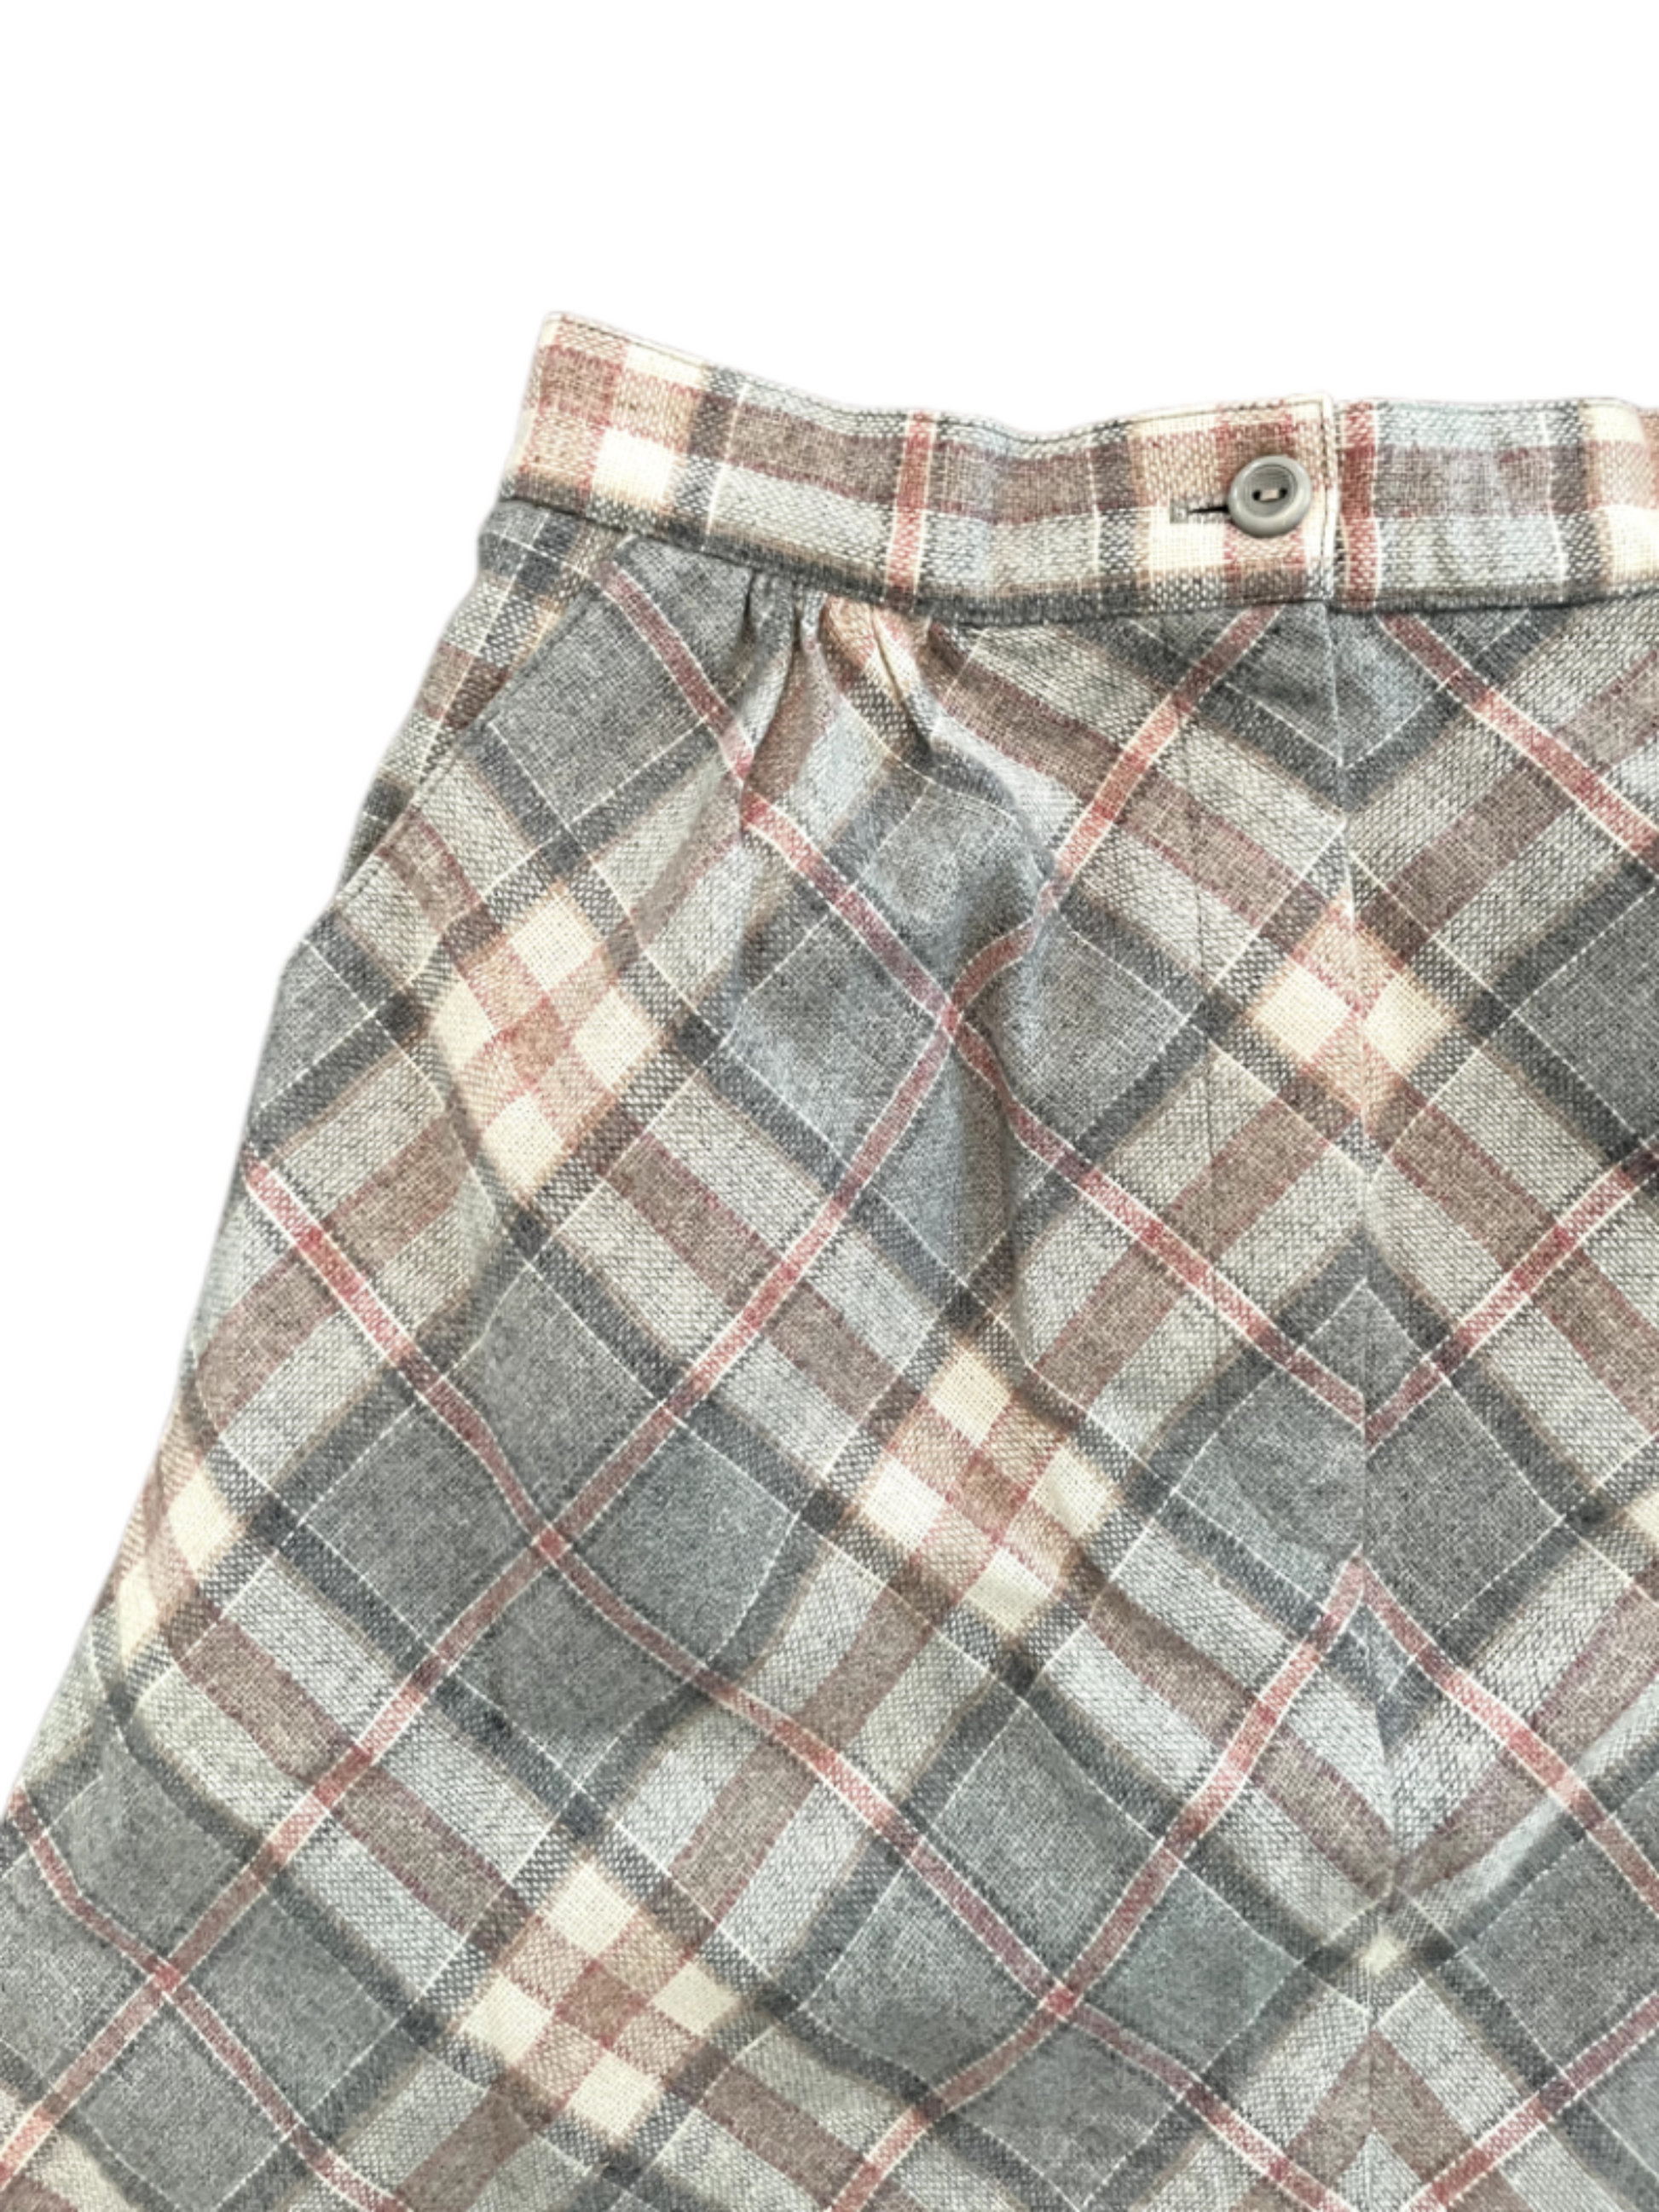 Vintage ladies 7/8ths plaid skirt in pink, grey and white with front zipper and button on white background close up image of pockets and button.